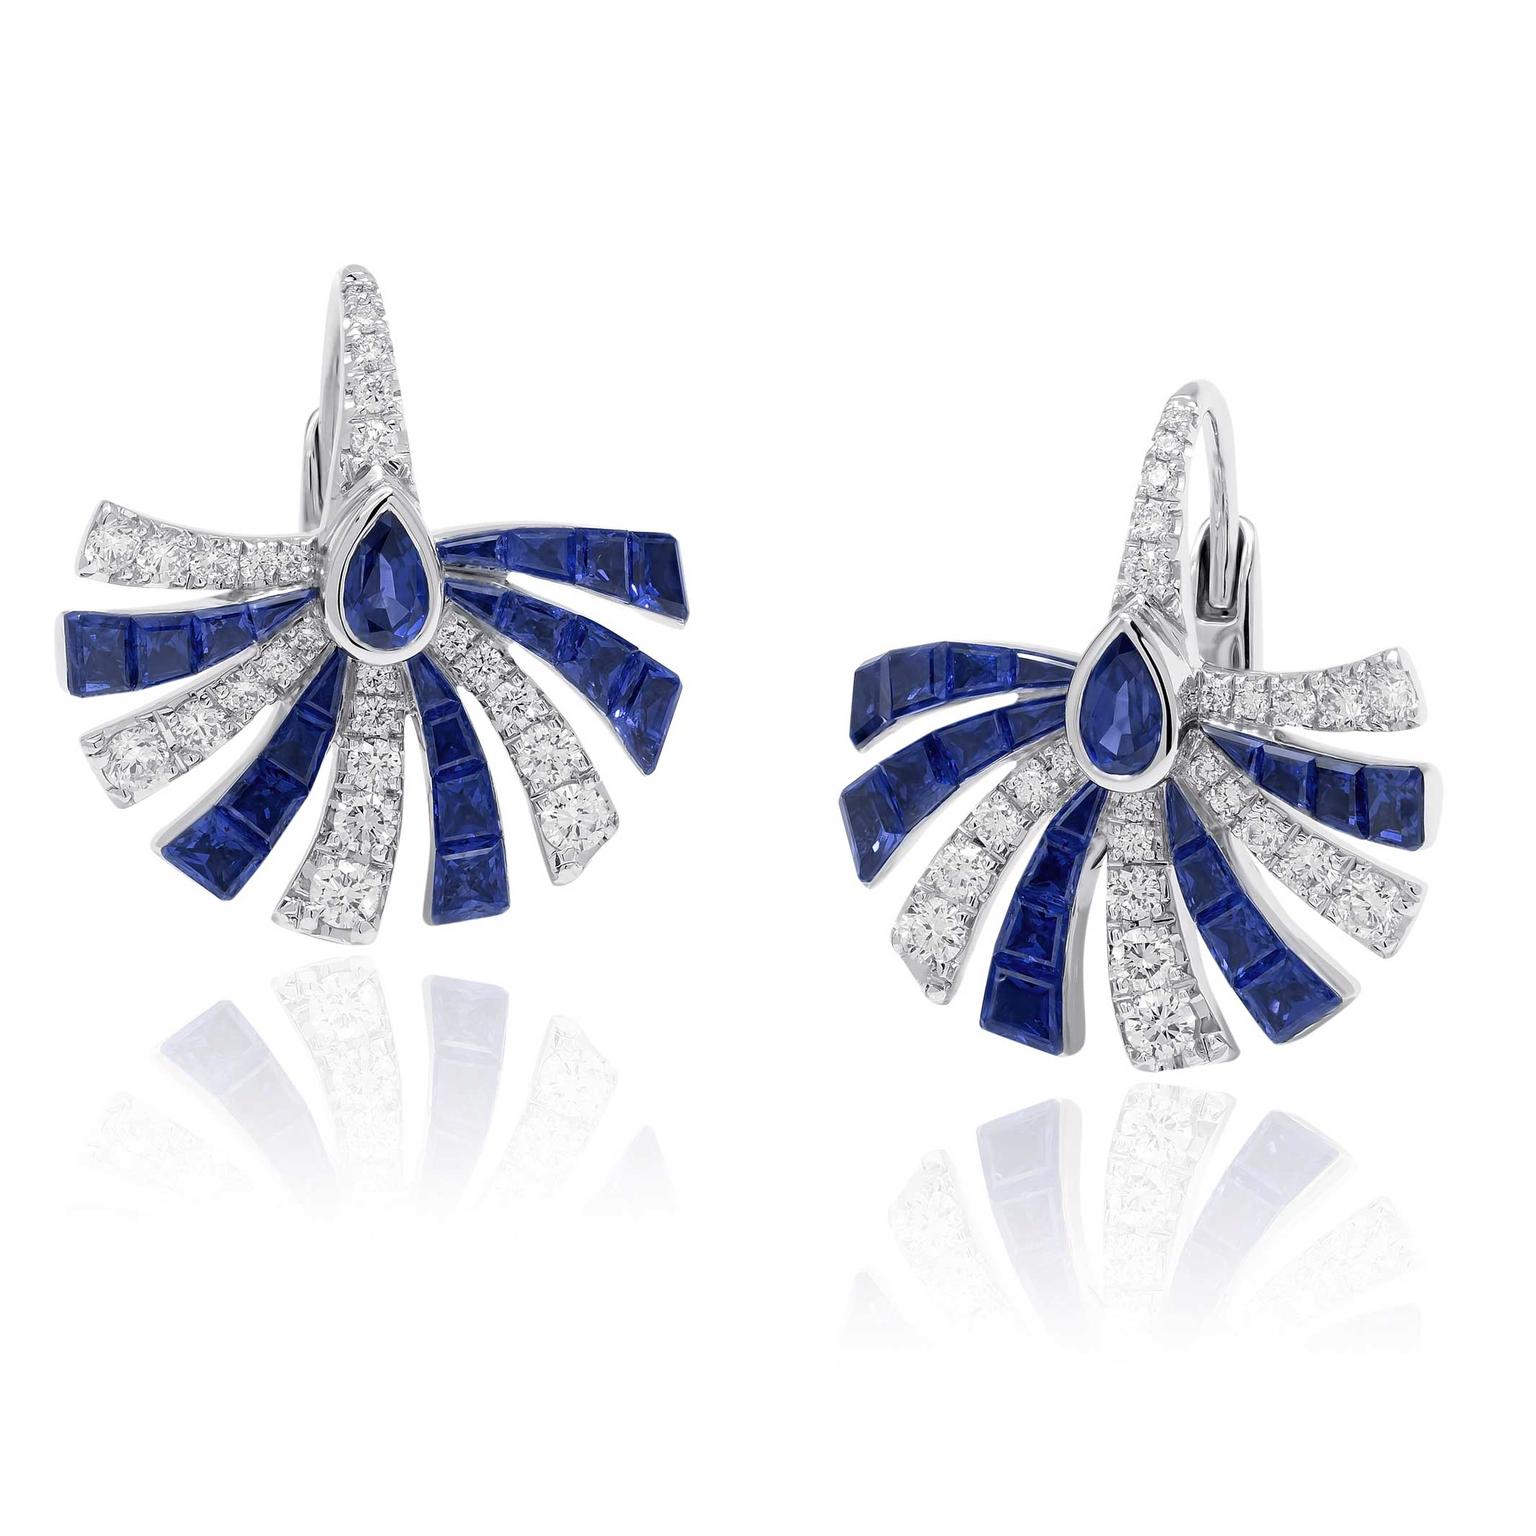 Stenzhorn Persuasion hoop earrings in white gold with sapphires and diamonds